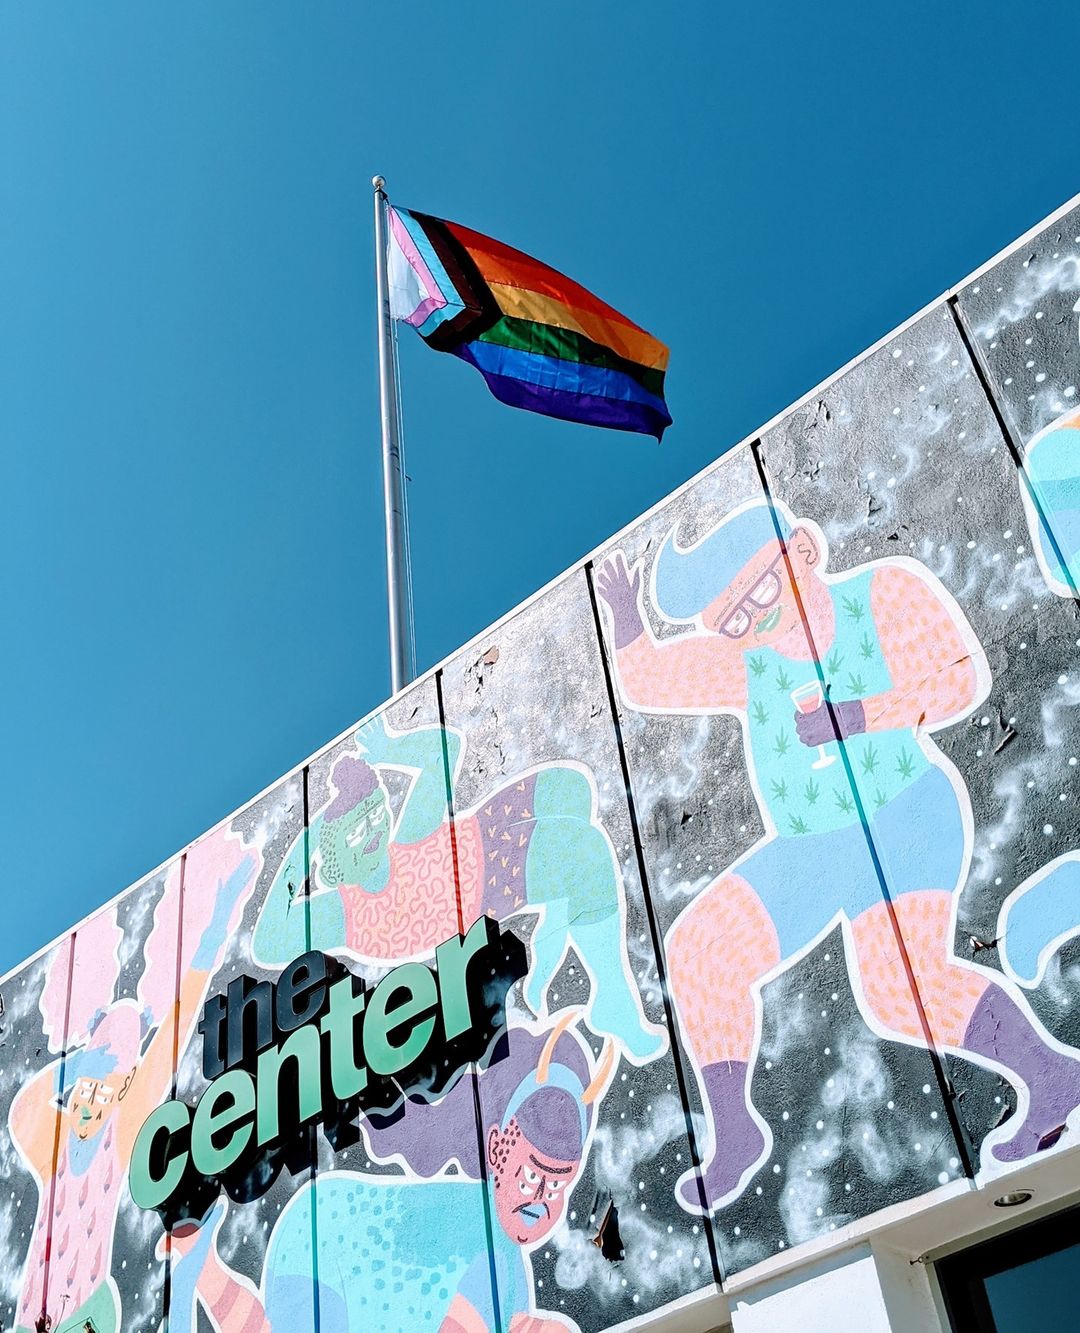 Sign of The Center featured amidst a mural that shows body positivity and gender inclusion, with a traditional rainbow Pride pattern, paired with Trans colors and black and brown stripes to "represent marginalised LGBT communities of colour." Photo by Instagram user @centerlb.